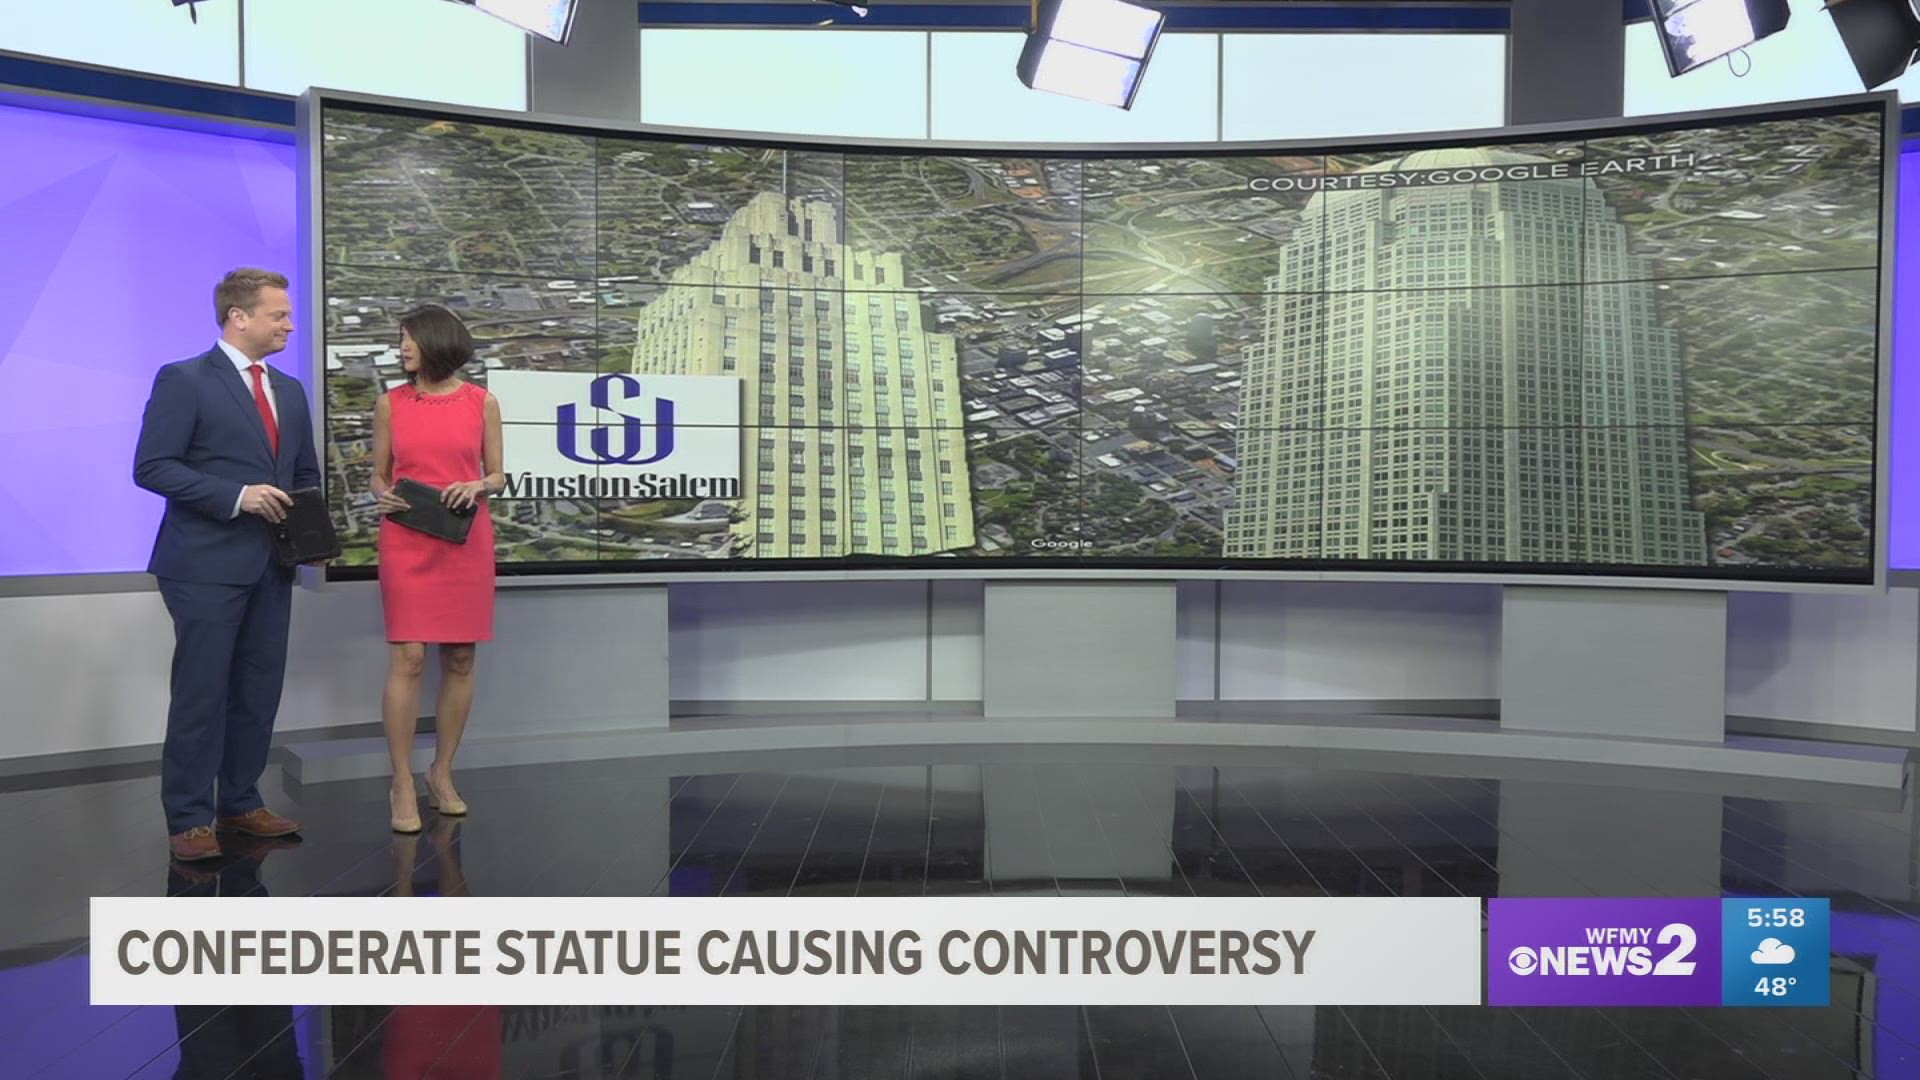 The city of Winston-Salem is demanding the statue be moved by the end of the month.